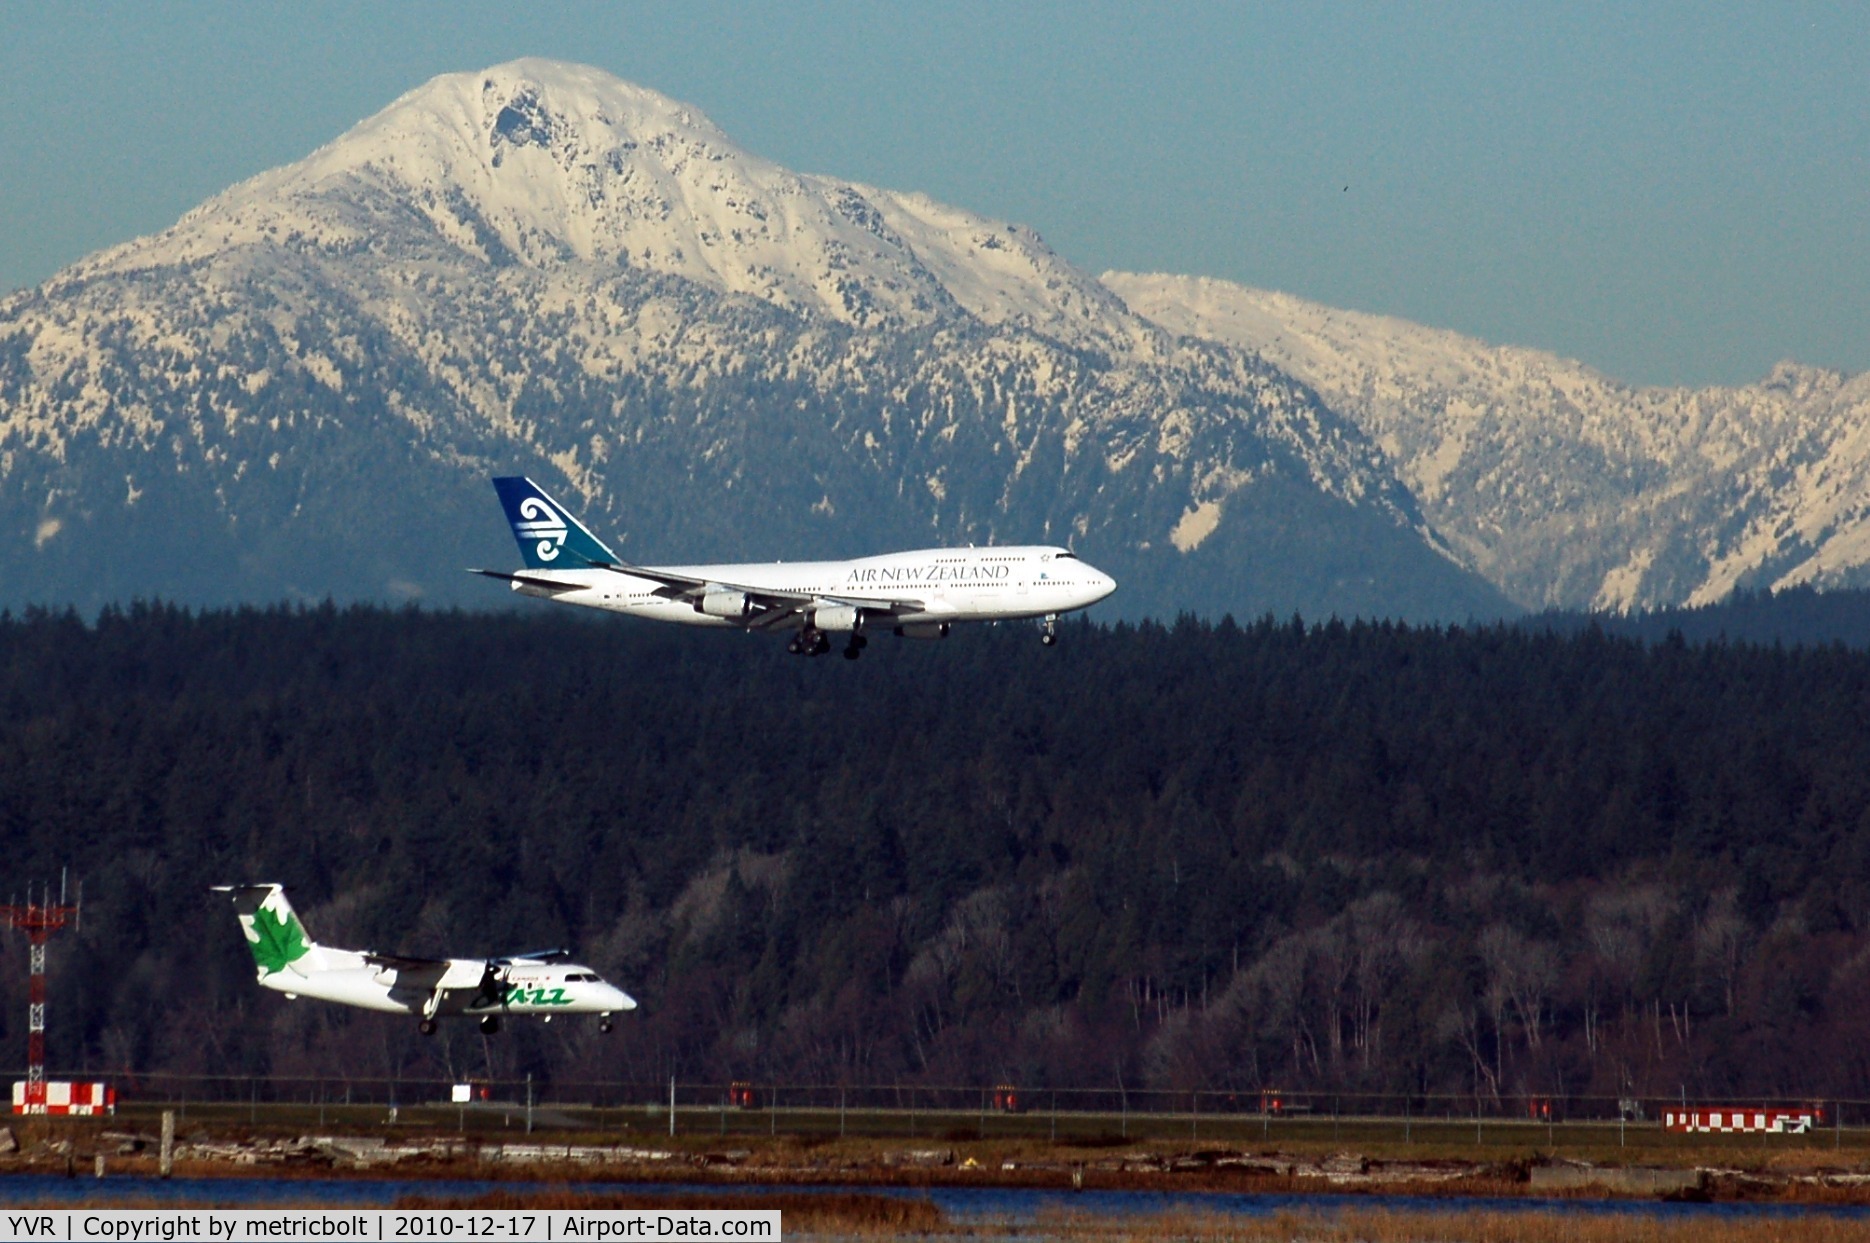 Vancouver International Airport, Vancouver, British Columbia Canada (YVR) - ANZ B747 and Jazz landing